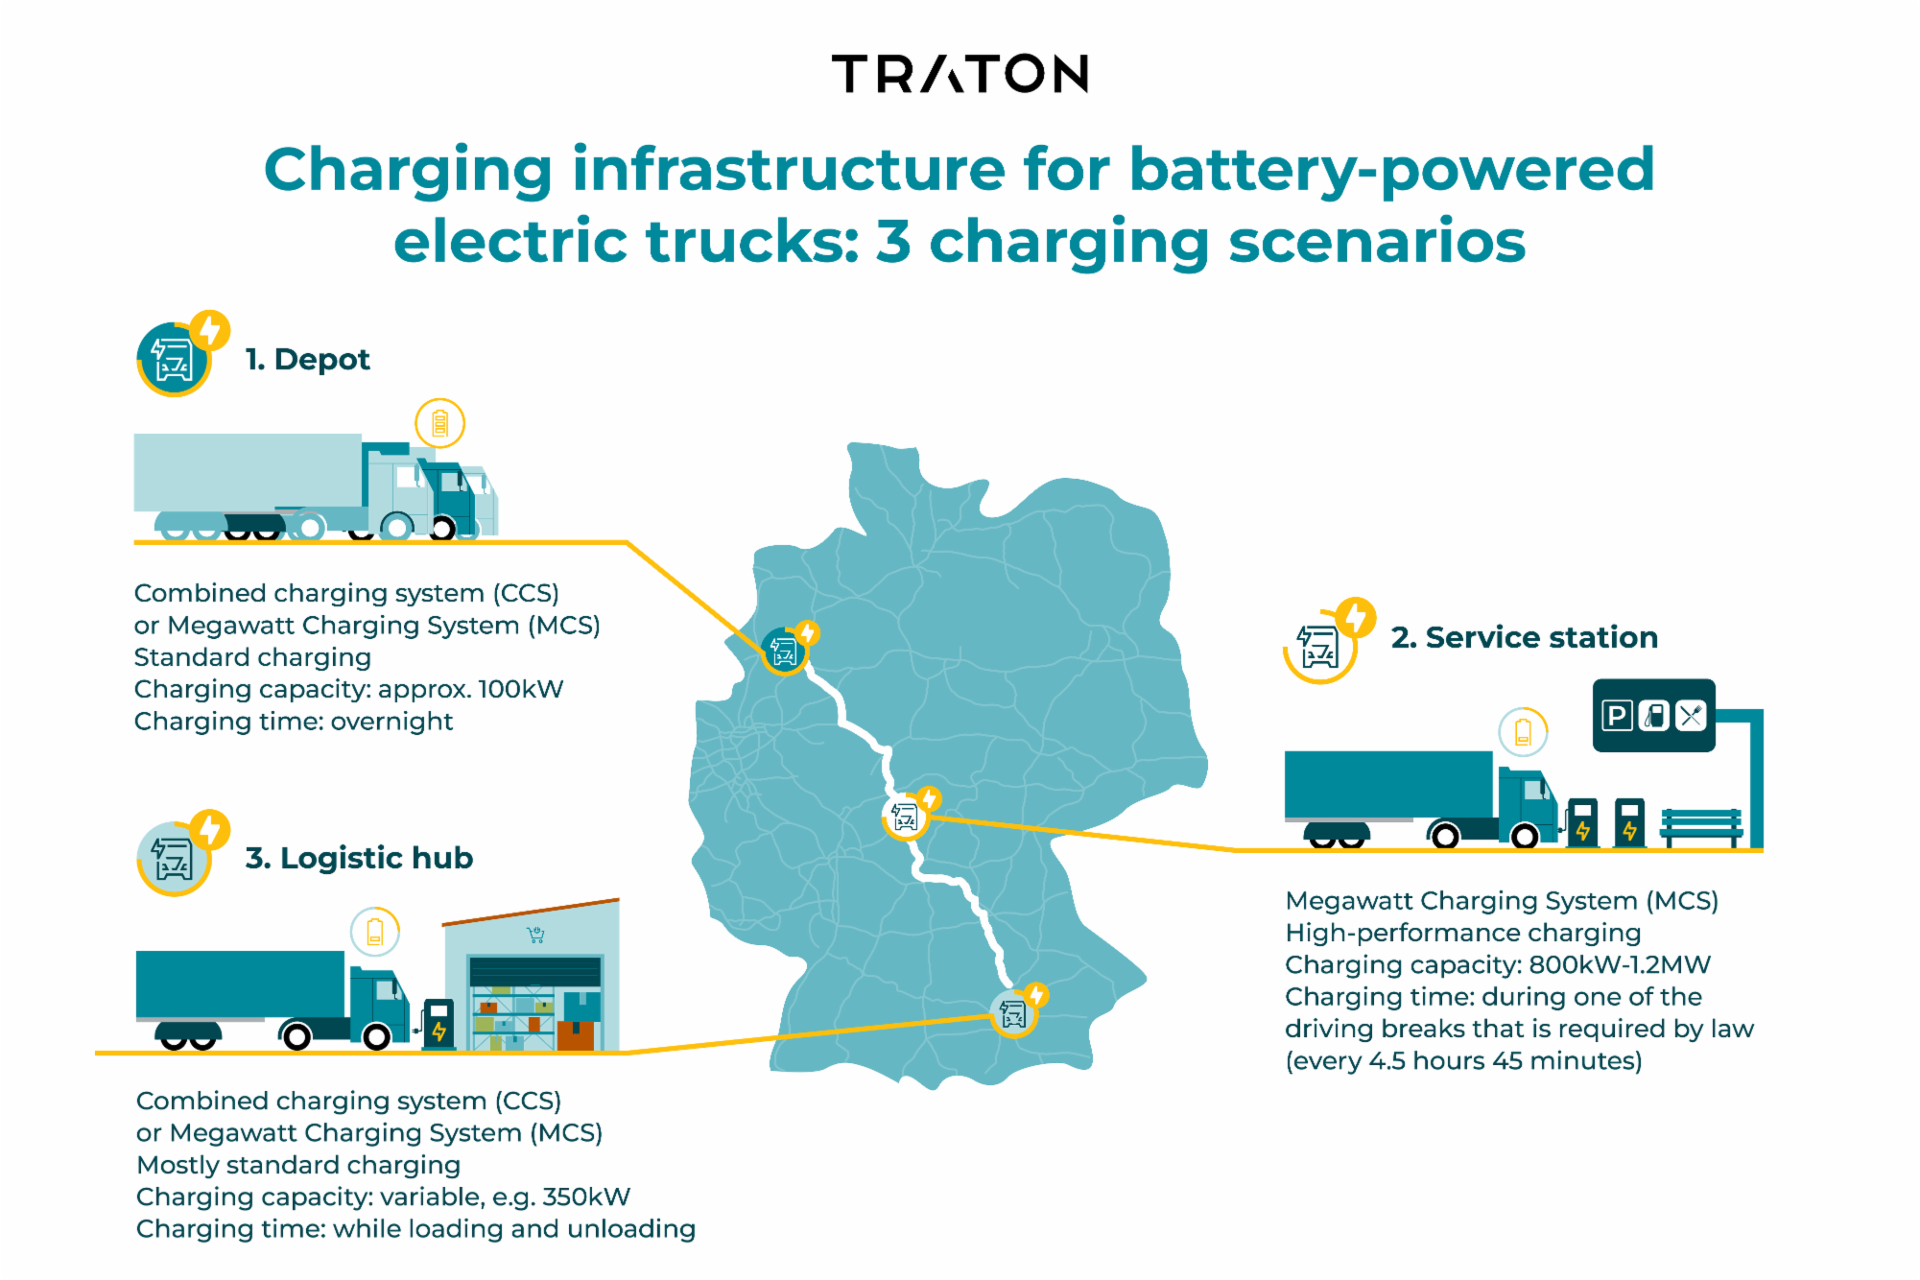 Map of Germany with 3 charging scenarios for battery-powered electric trucks